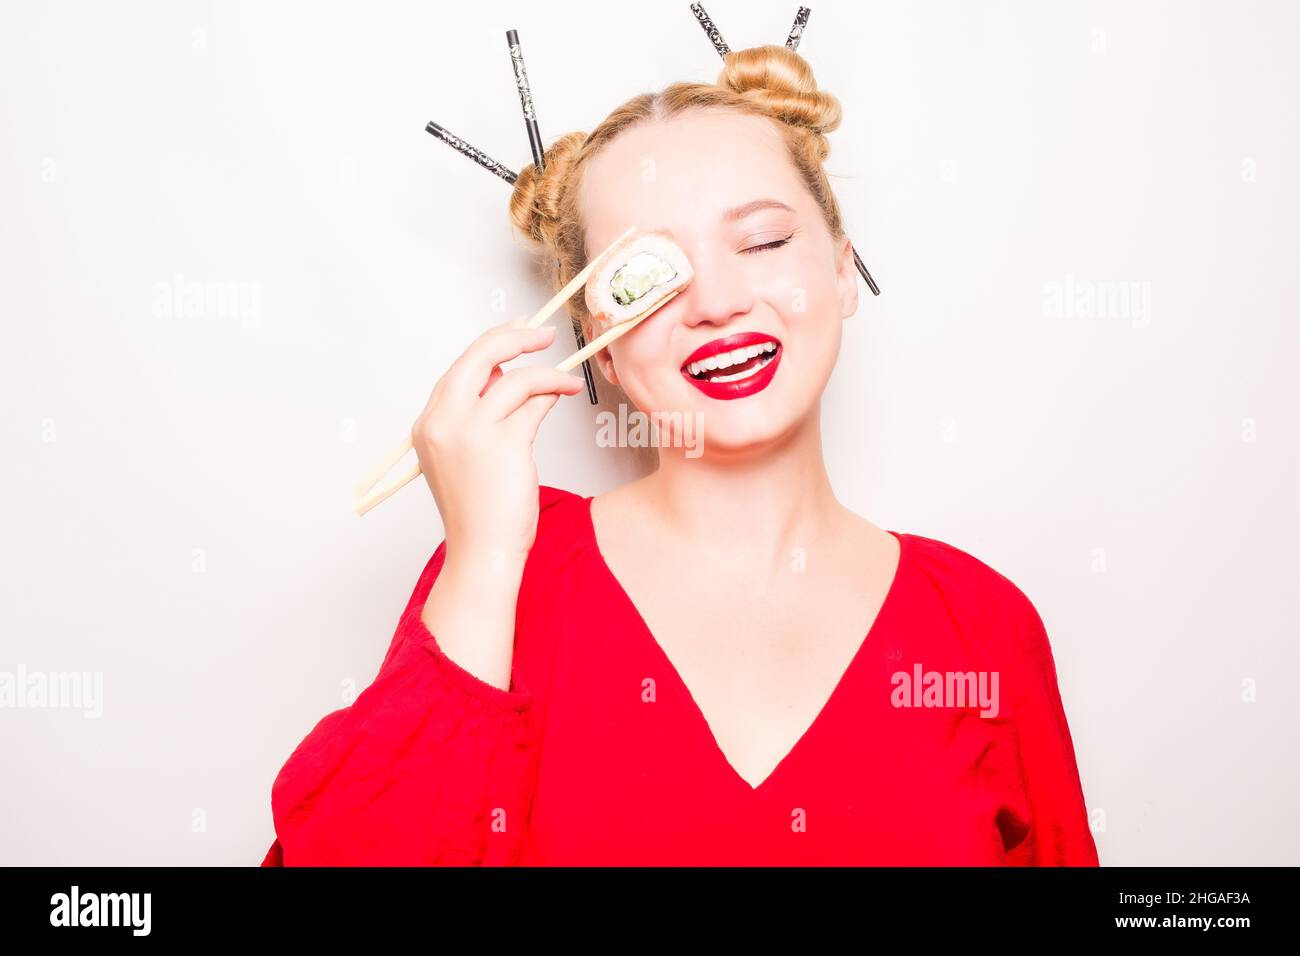 595 Chopsticks Hairstyle Images Stock Photos  Vectors  Shutterstock